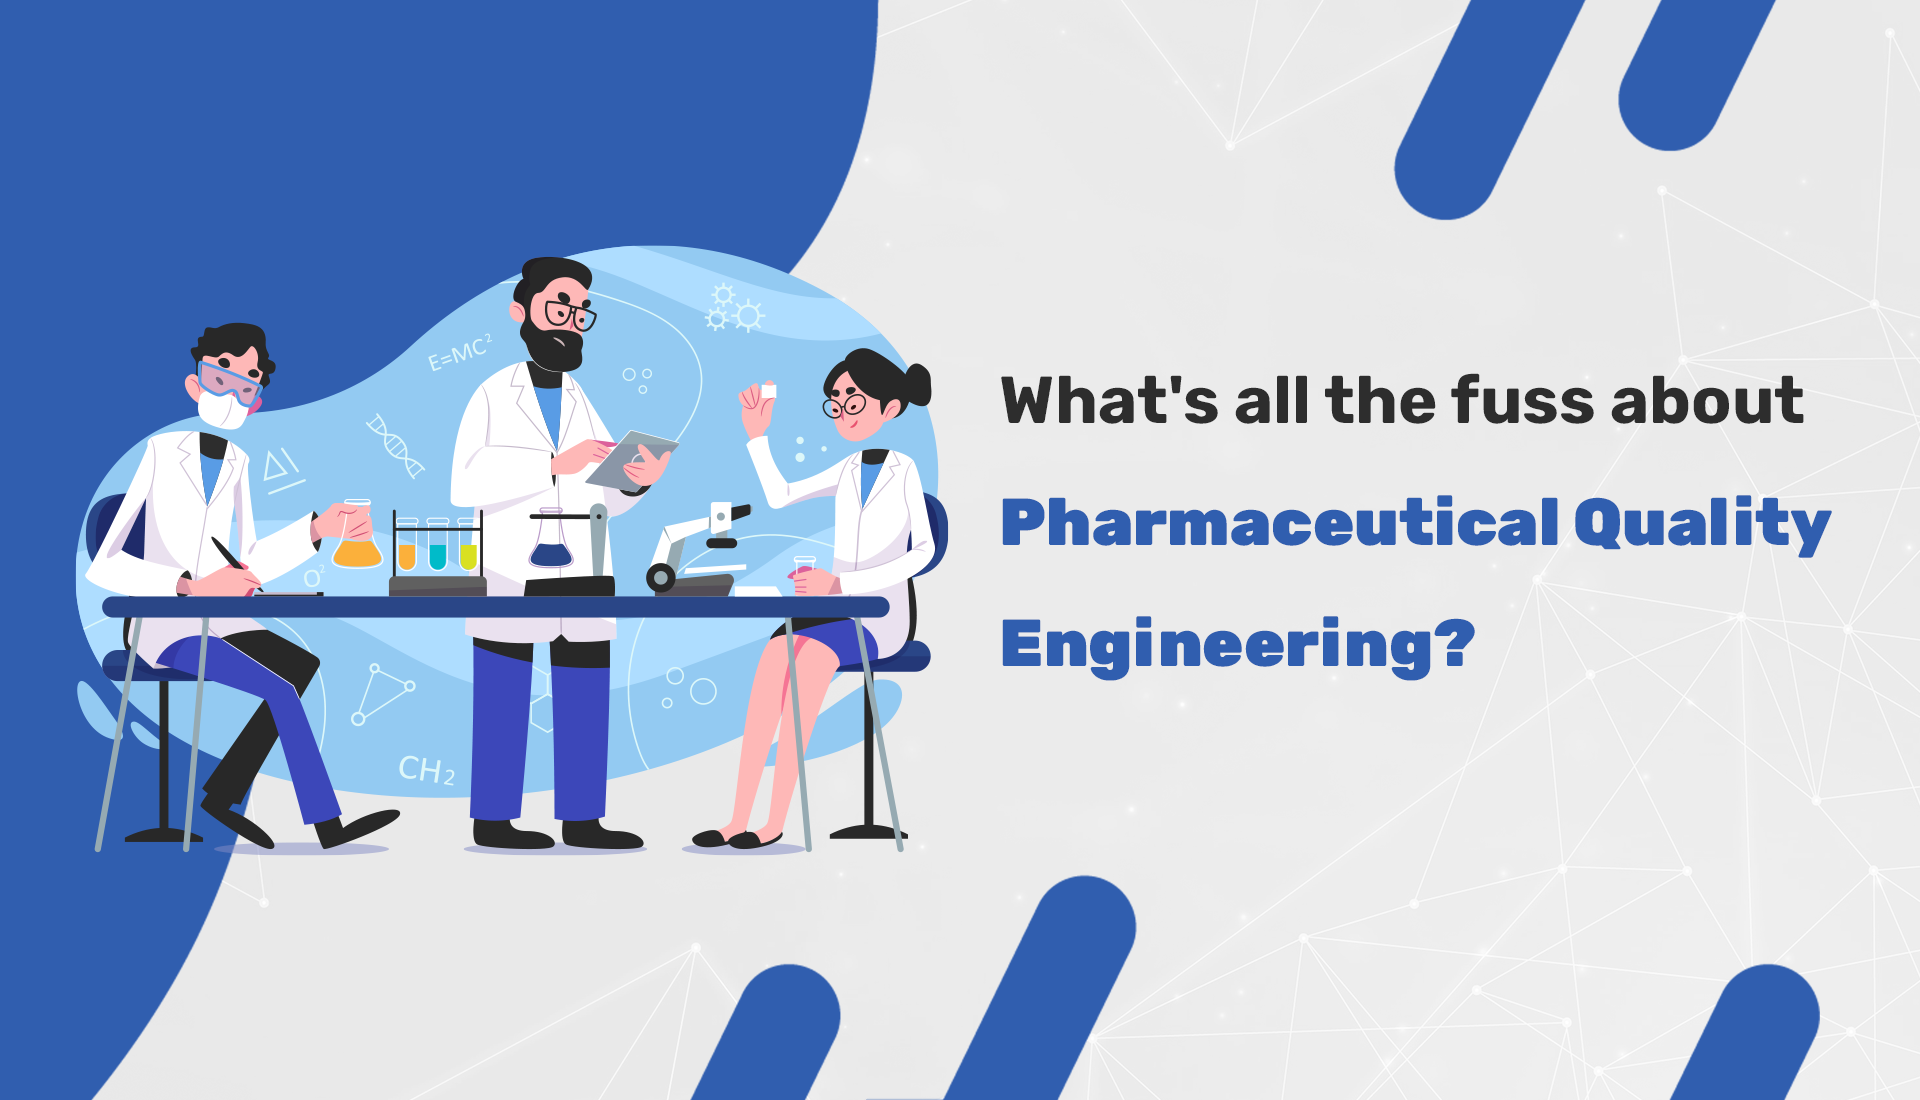 What's-all-the-fuss-about-Pharmaceutical-Quality-Engineering-